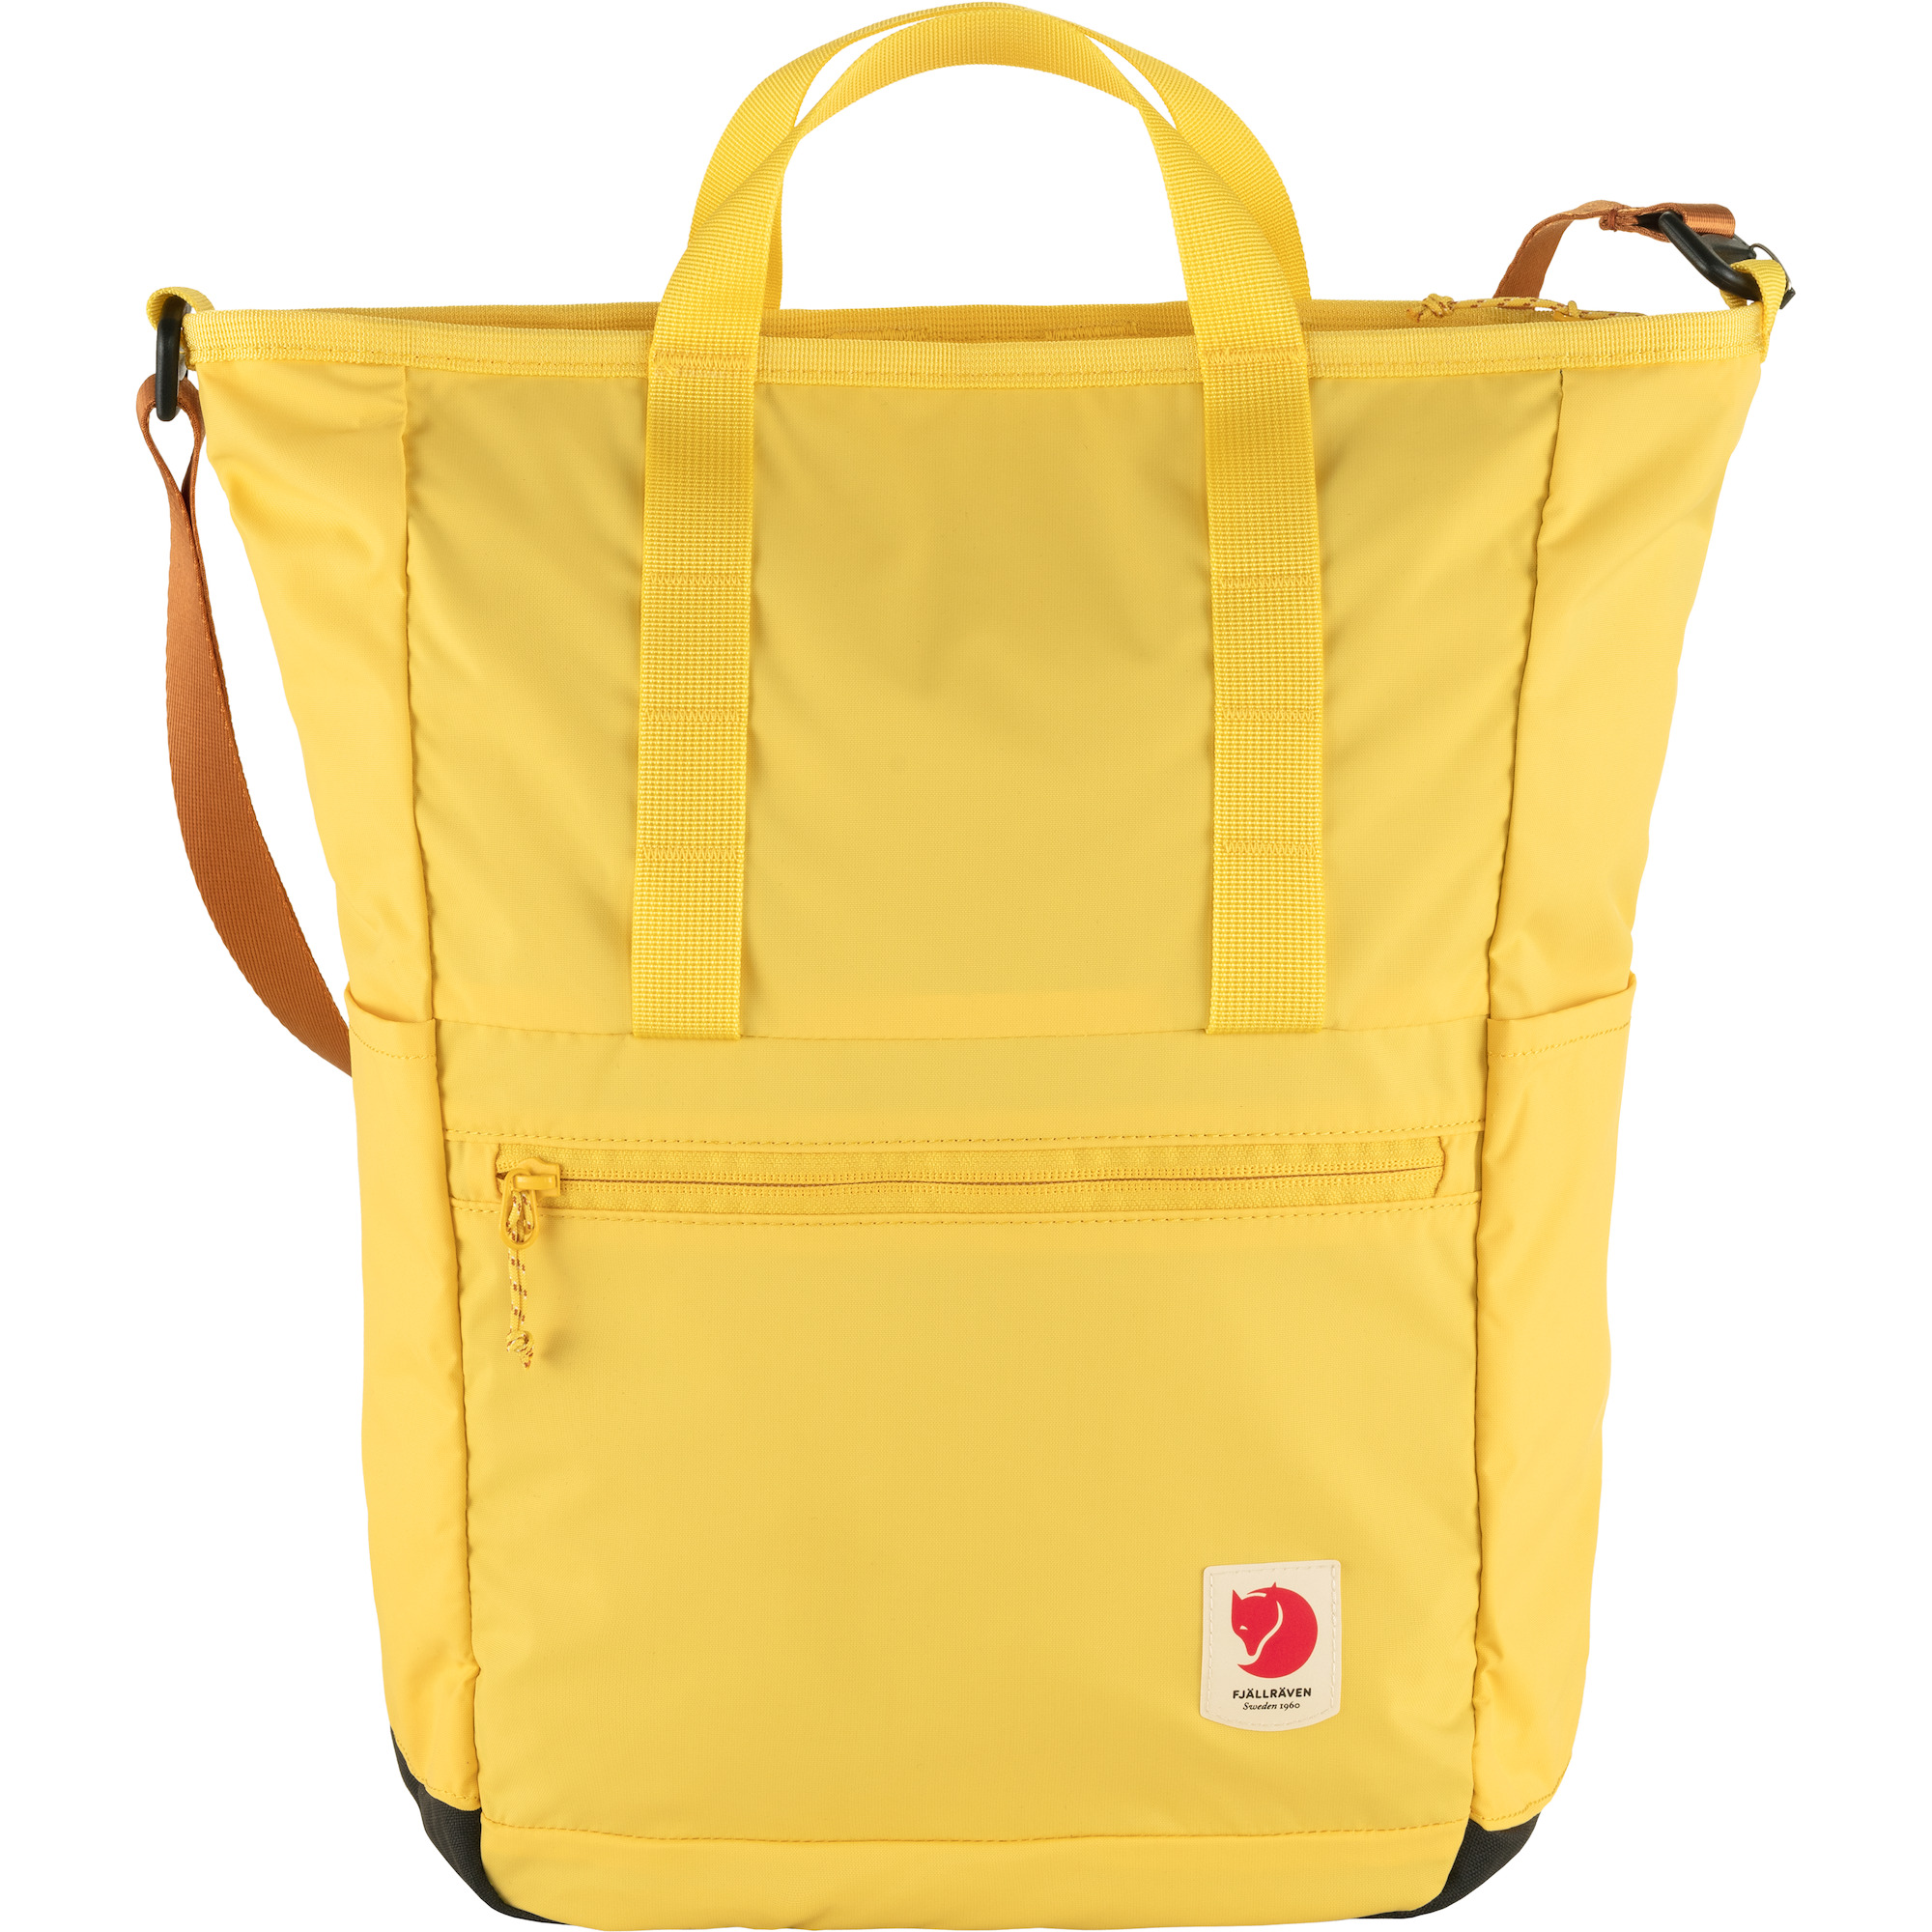 Fjällräven 23L 130 Mellow Yellow Everyday Outdoor High Coast Totepack Backpack 